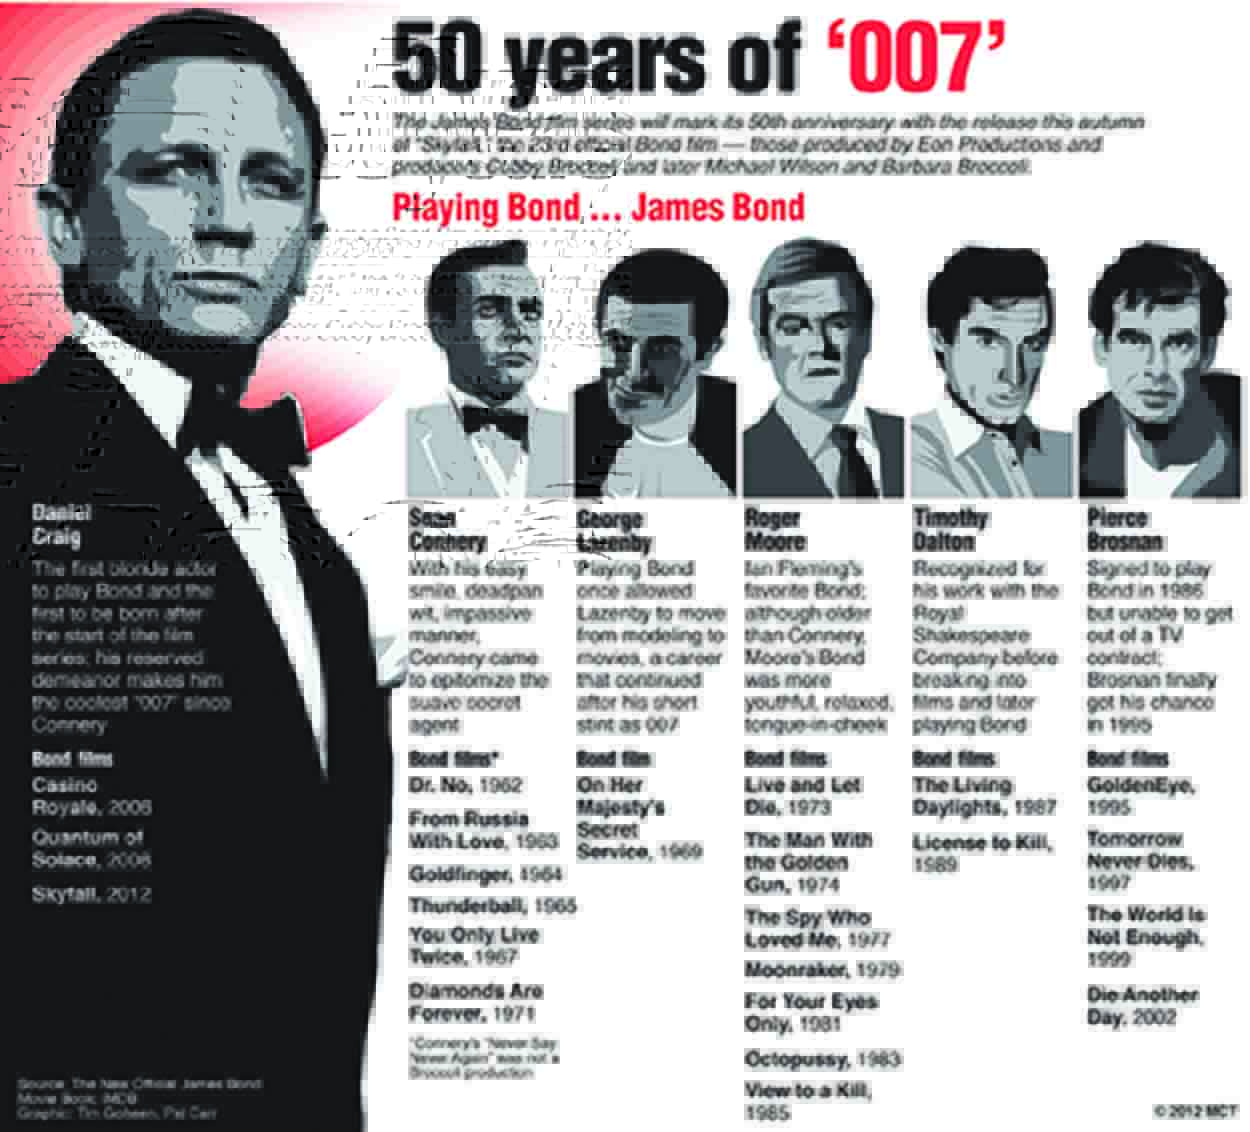 Film society honors James Bond legacy – The Northerner